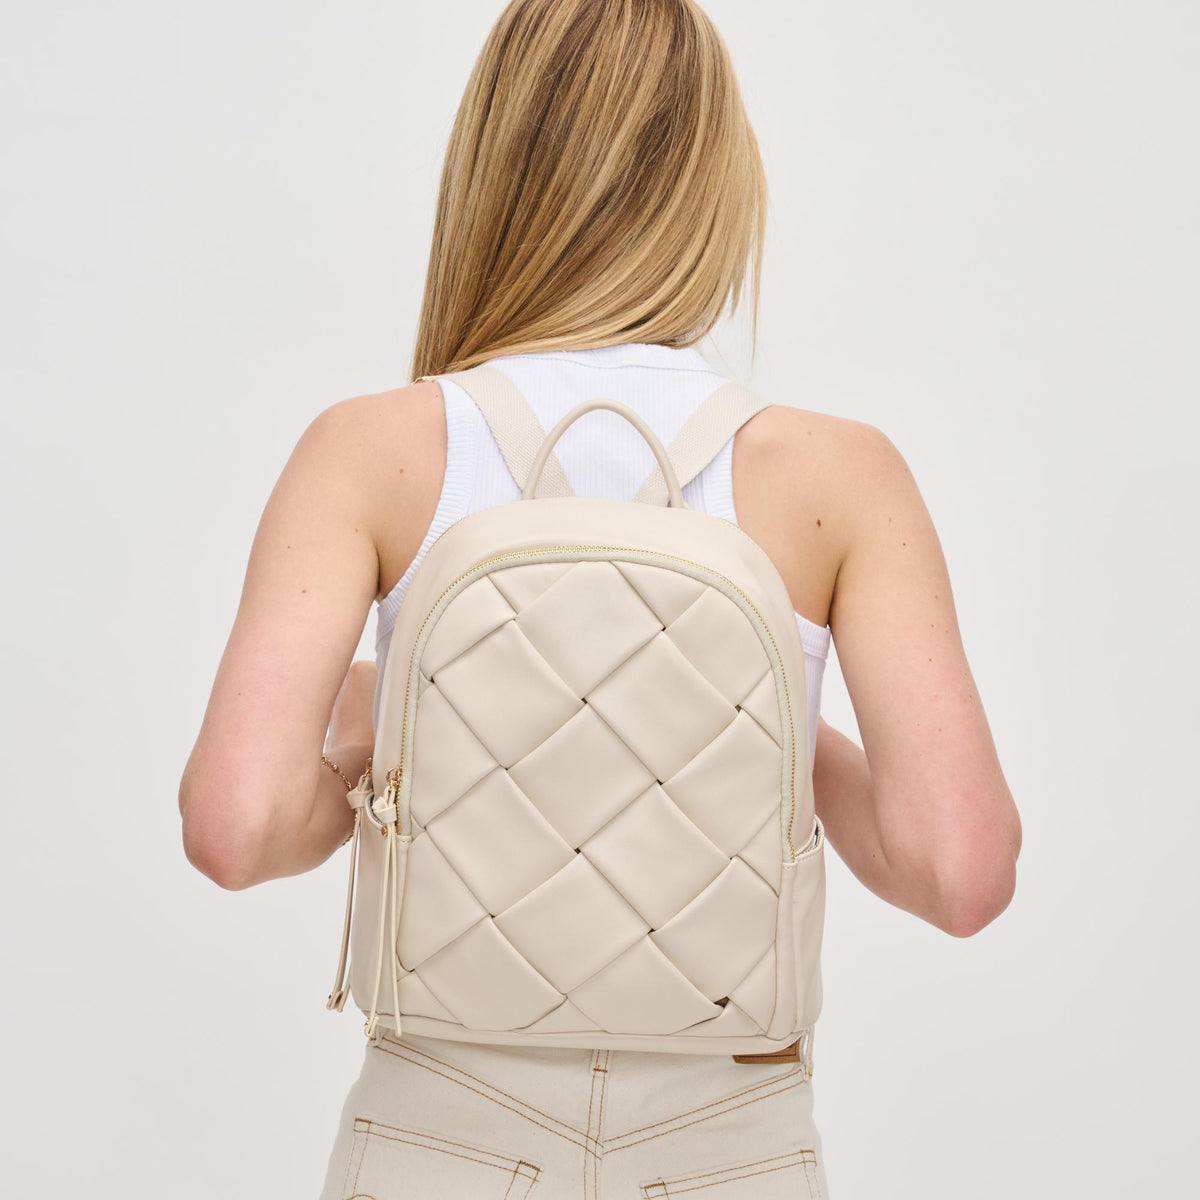 Woman wearing Oatmilk Urban Expressions Blossom Backpack 840611130648 View 1 | Oatmilk